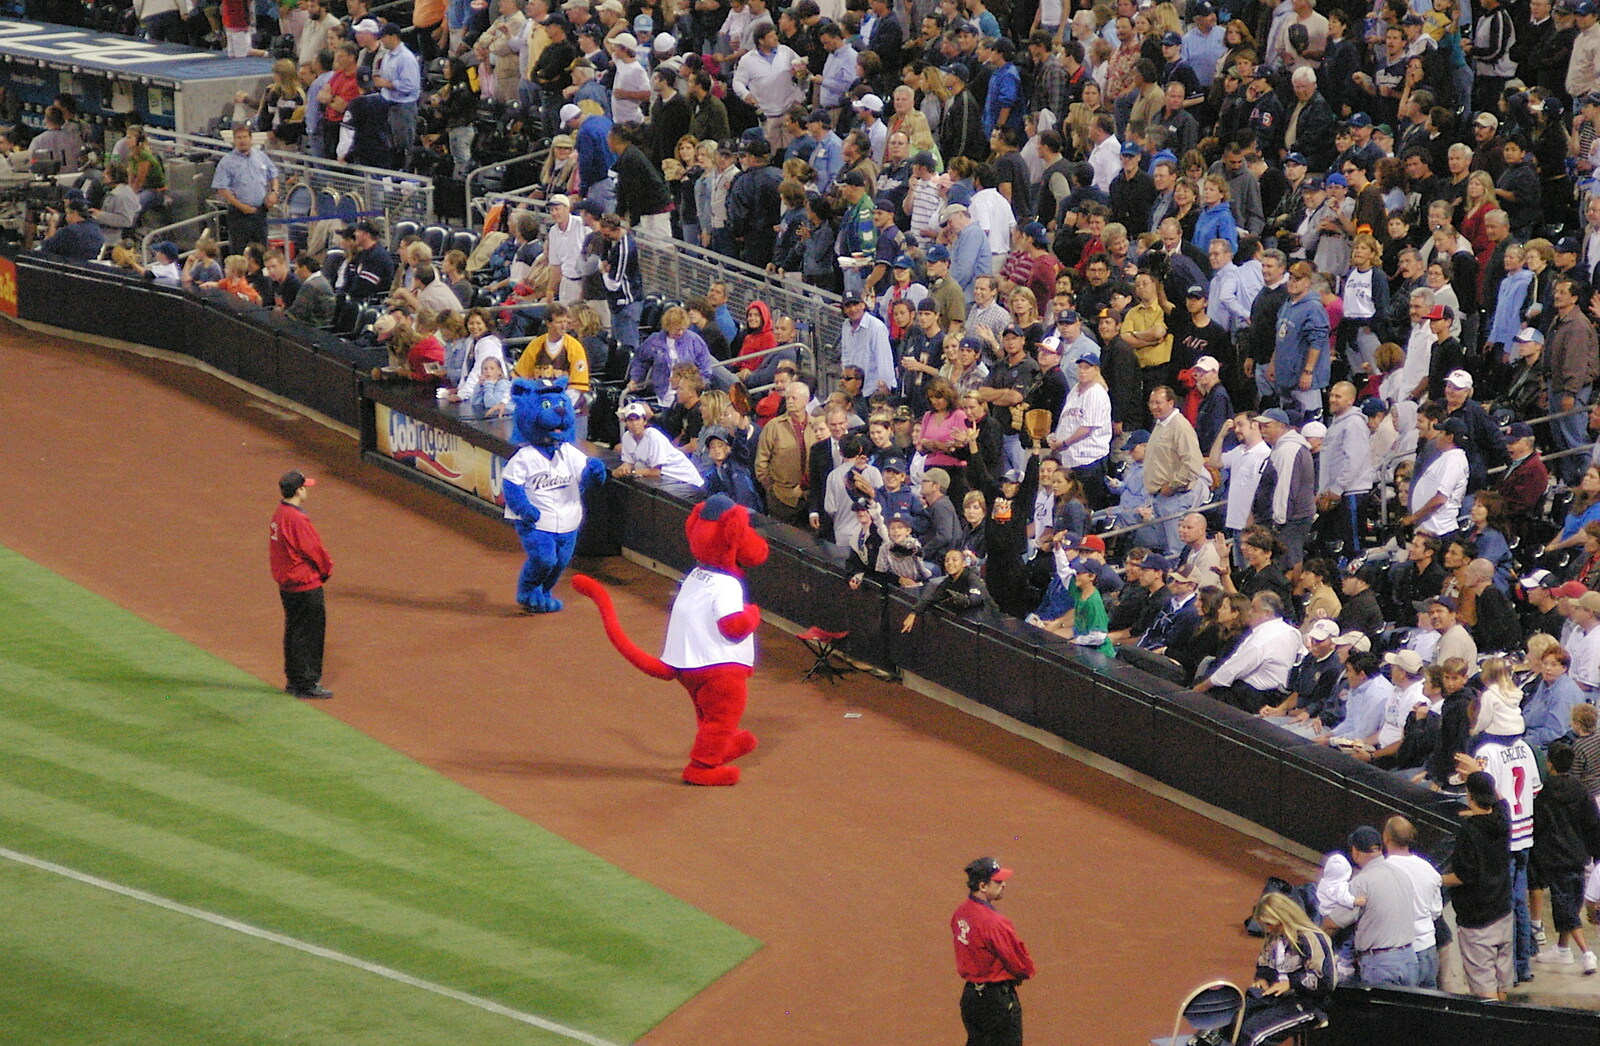 Padres mascots entertain the crowds from The Padres at Petco Park: a Baseball Game, San Diego, California - 31st May 2005